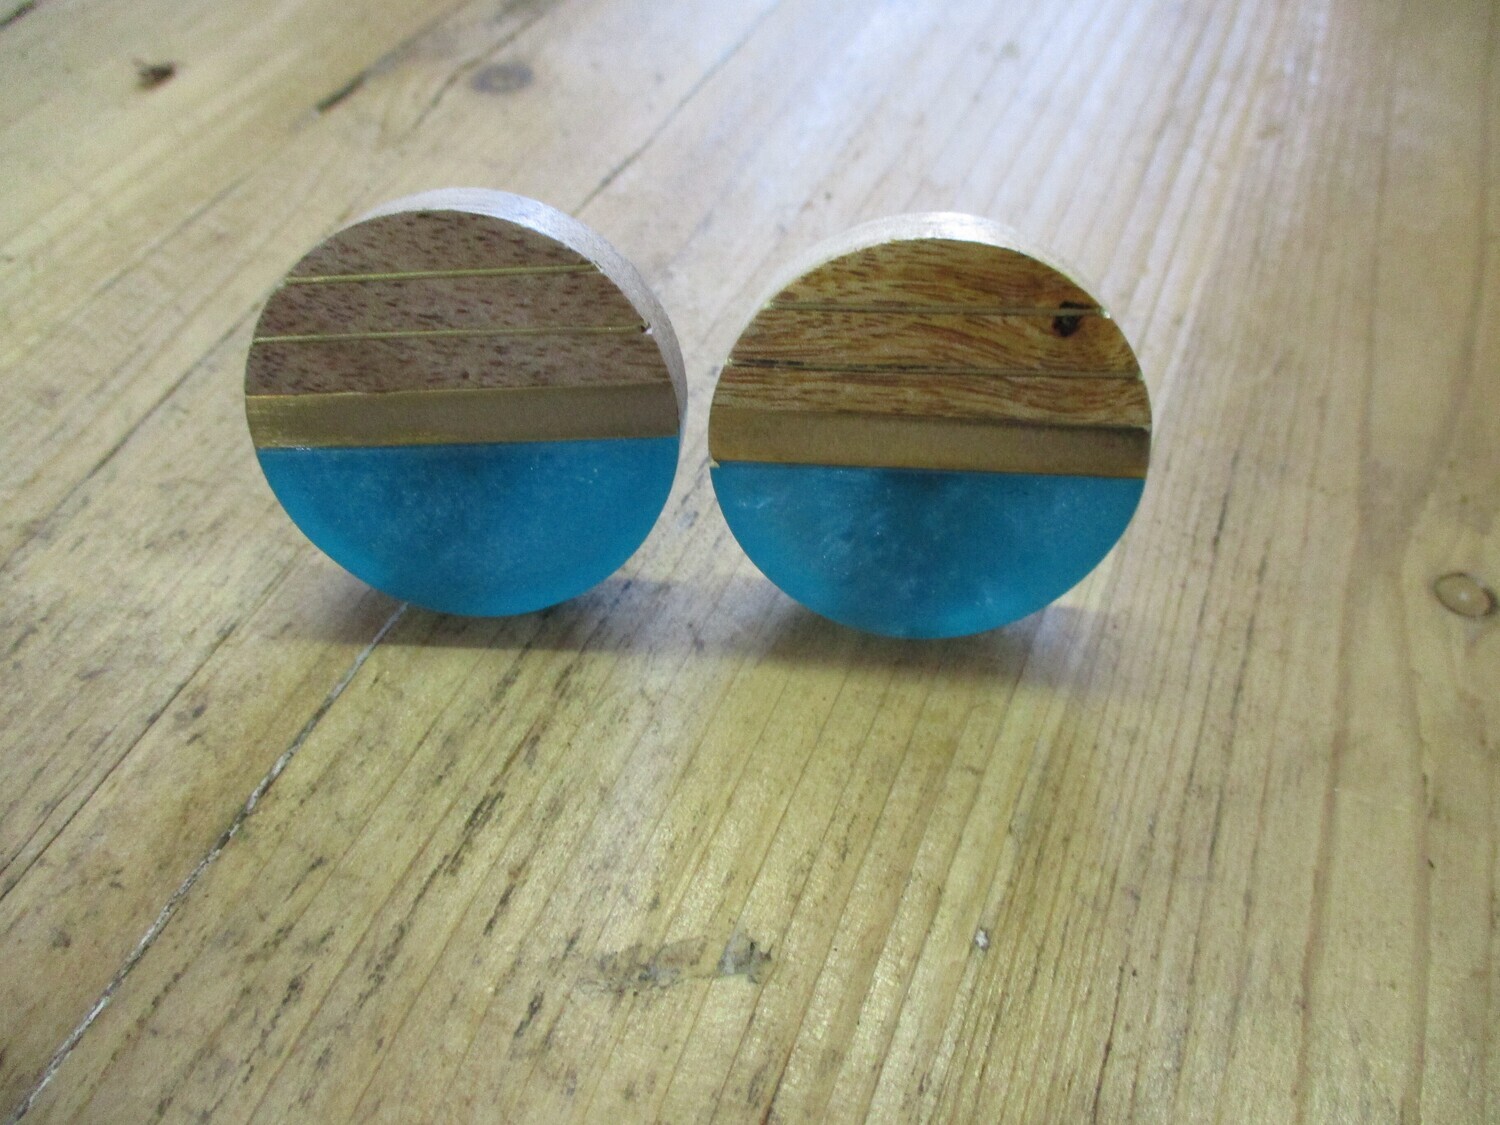 MID-CENTURY STYLE WOOD RESIN TURQUISE AND GOLD KNOBS